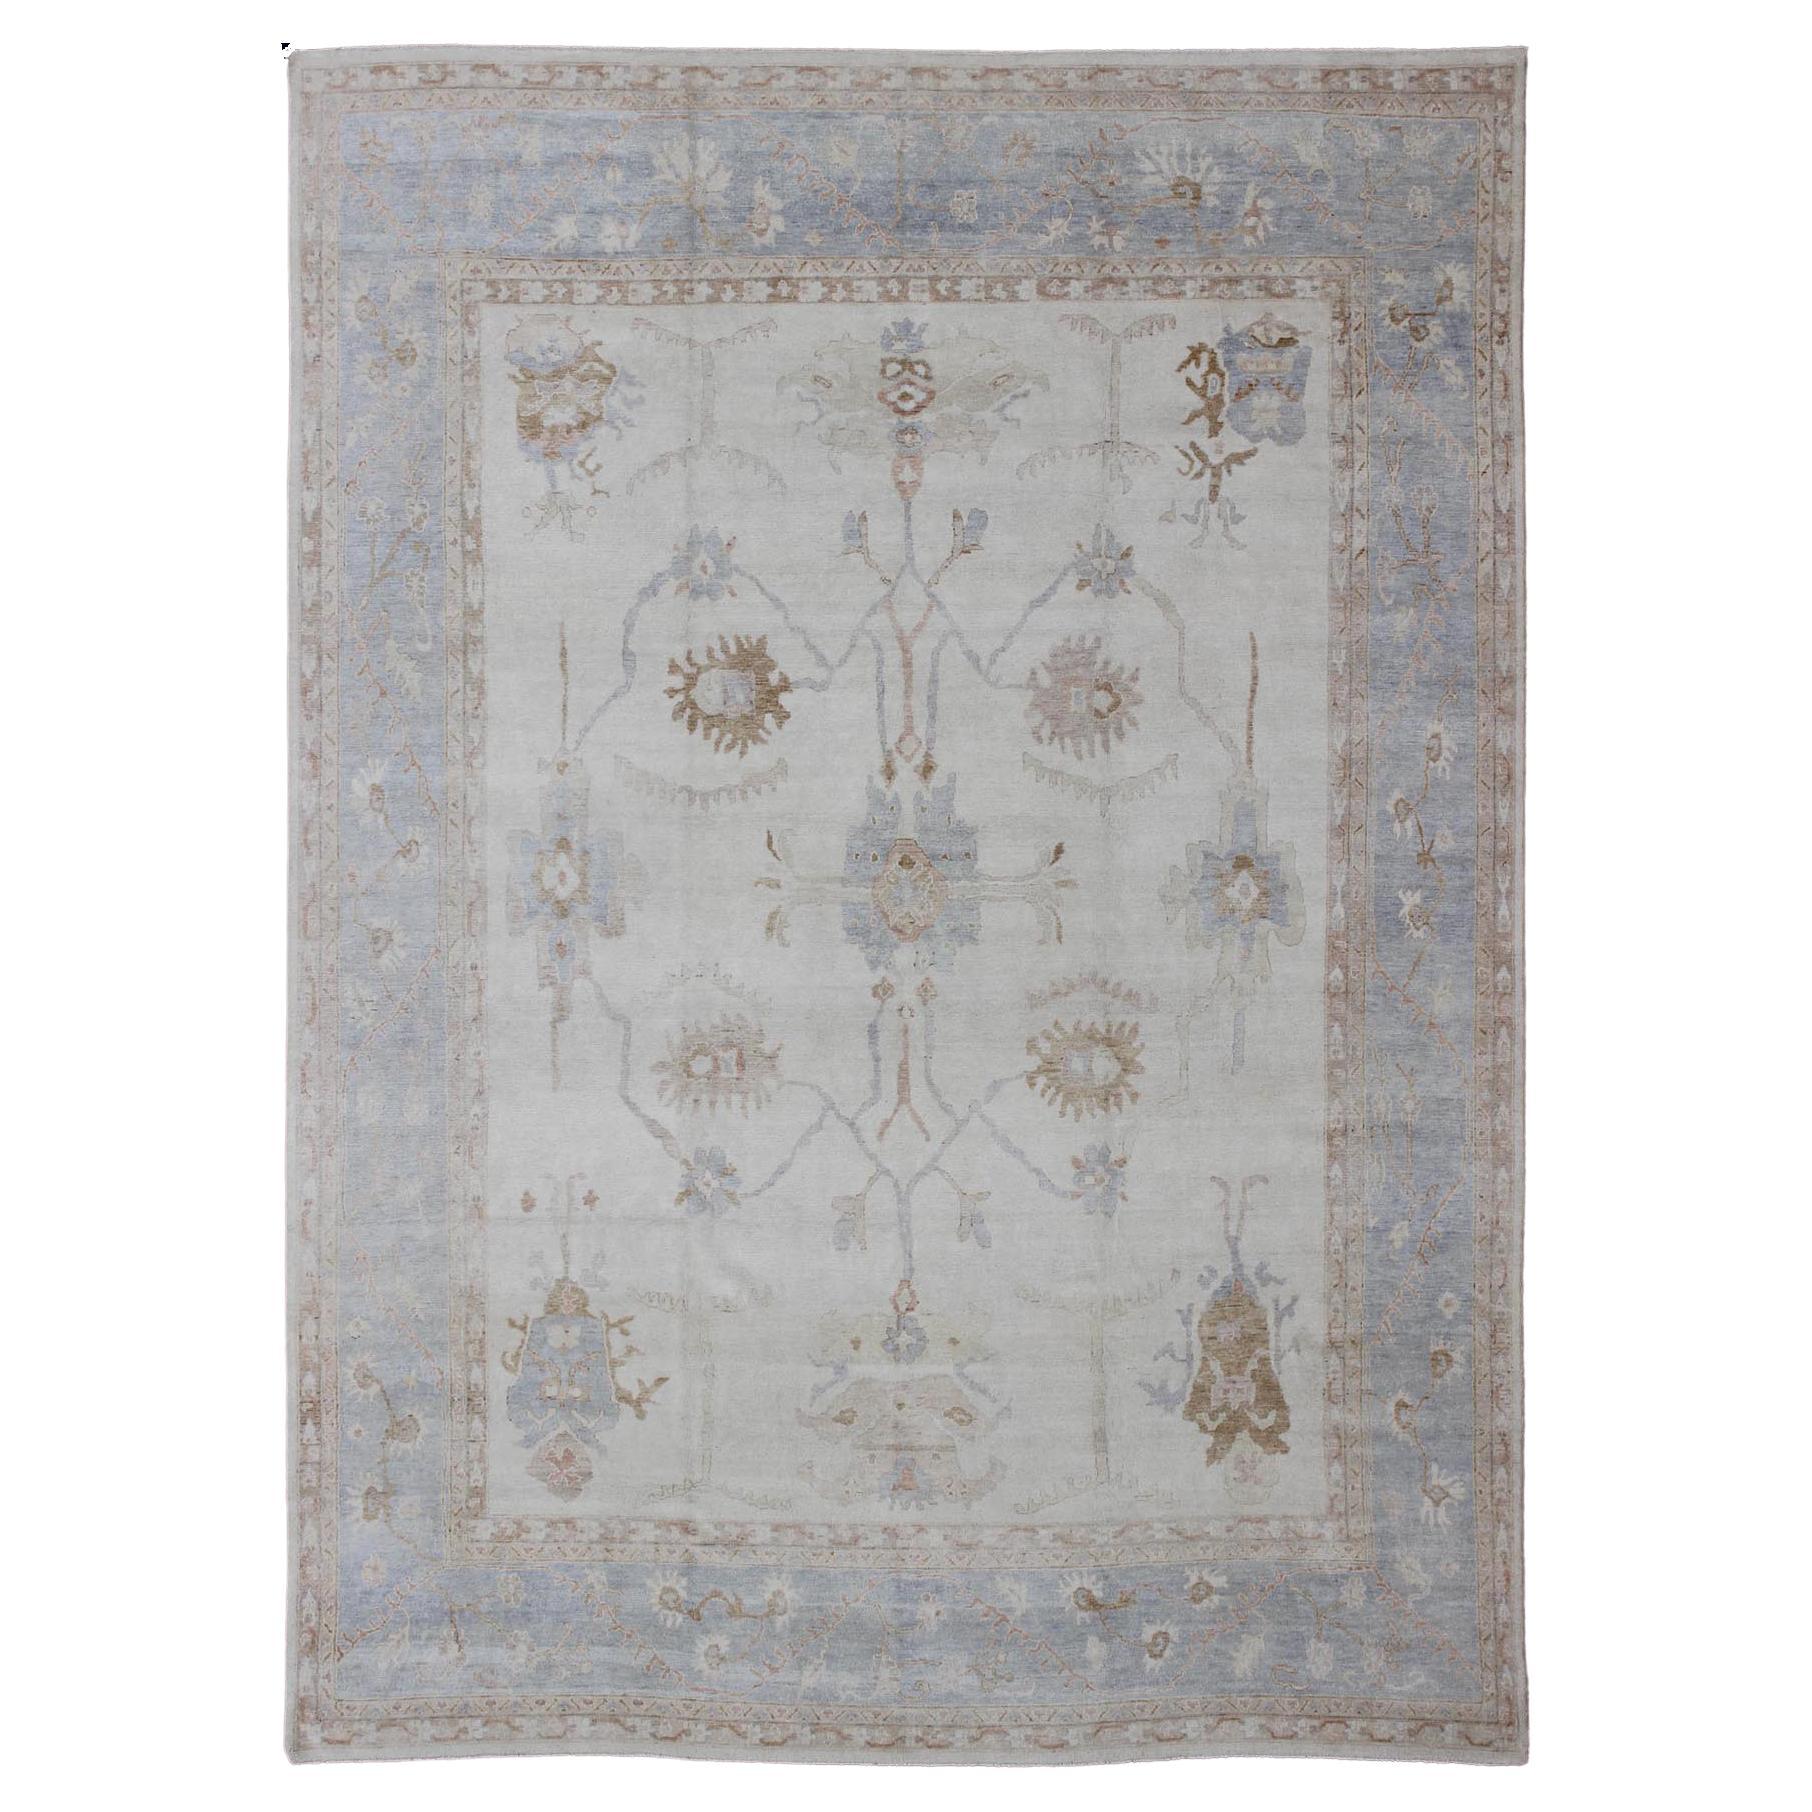 Large Oushak Rug in Blue, Light Brown, and White